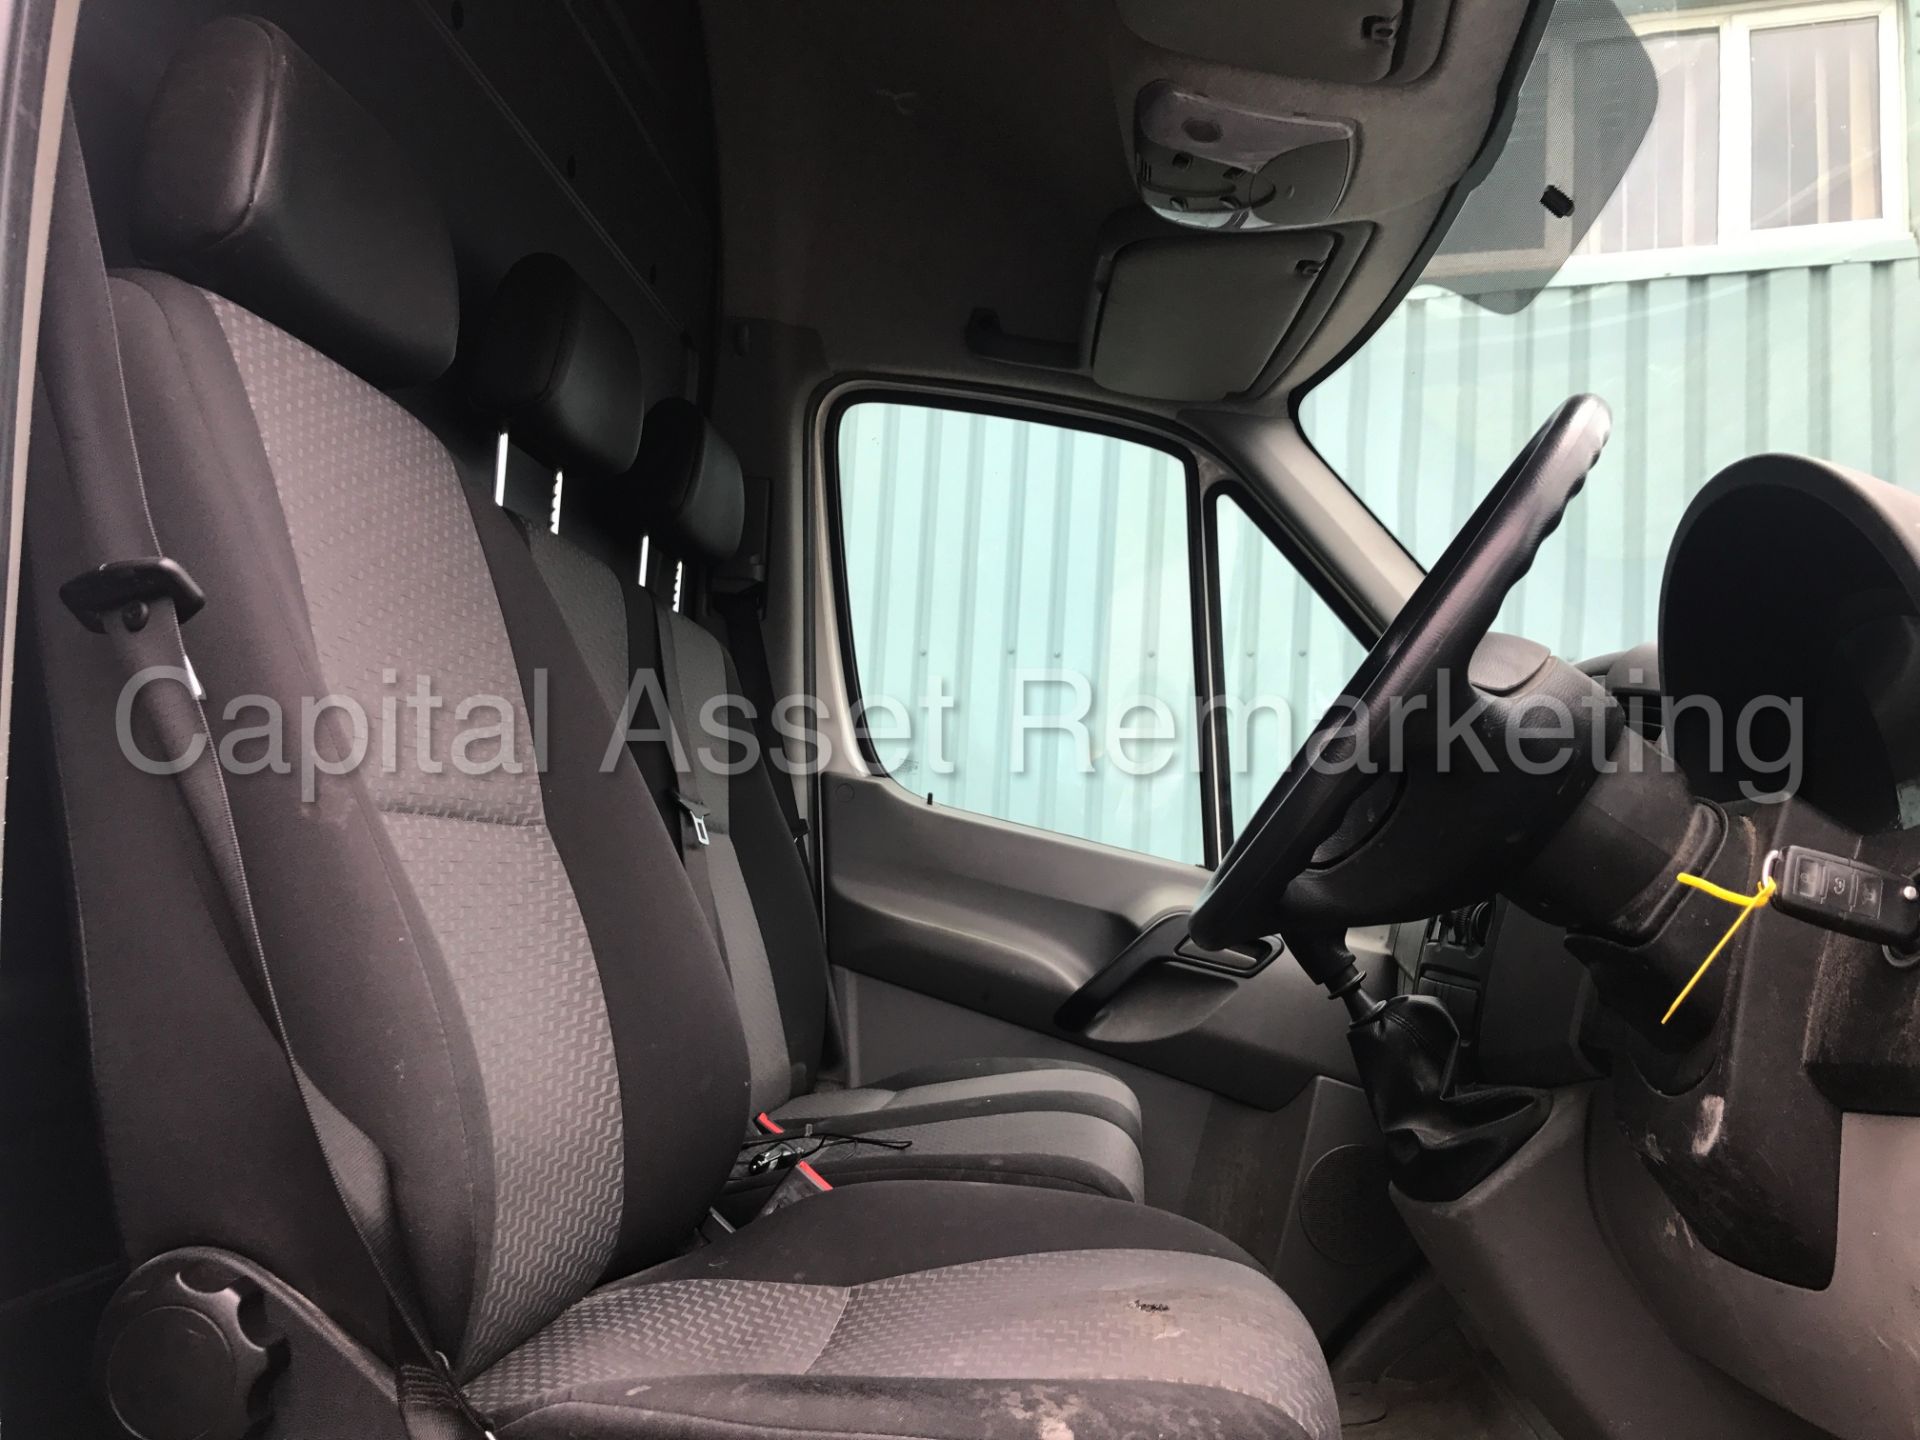 VOLKSWAGEN CRAFTER CR35 'MWB HI-ROOF' (2014) '2.0 TDI - 109 PS - 6 SPEED' *1 COMPANY OWNER FROM NEW* - Image 15 of 19